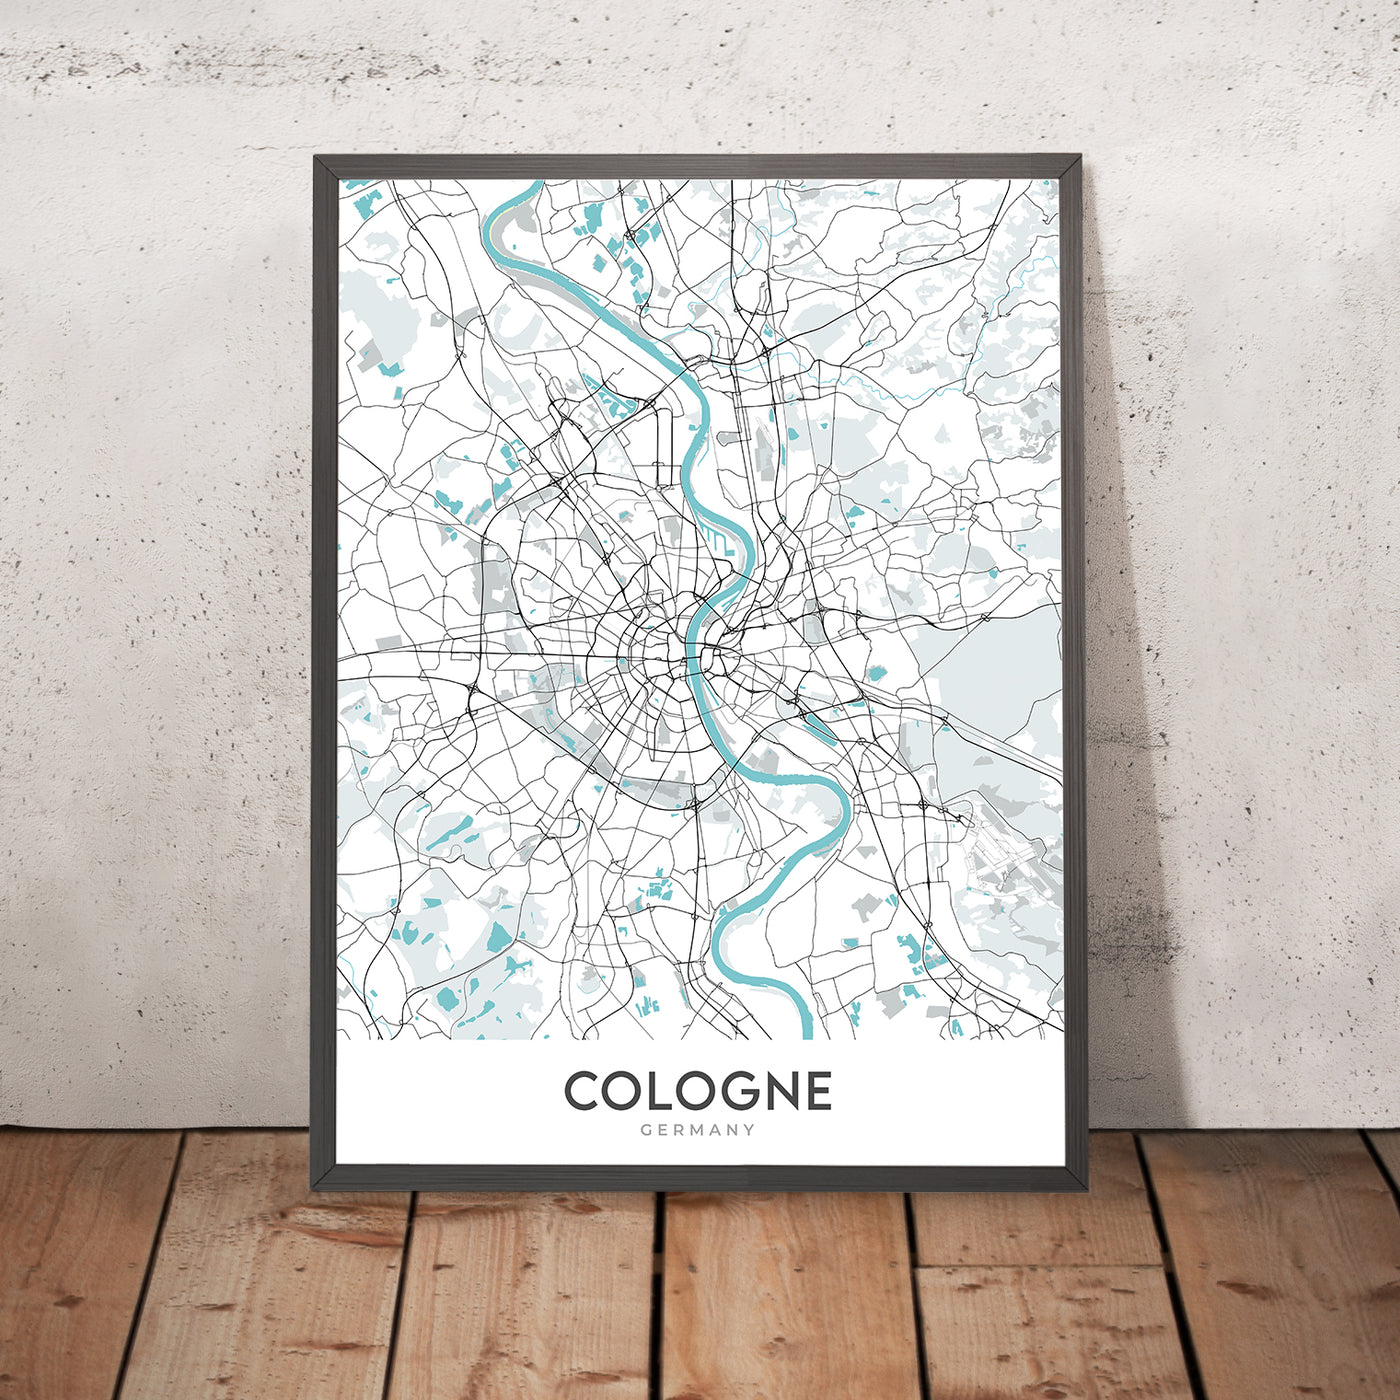 Modern City Map of Cologne, Germany: Cathedral, Triangle, Opera, Museum, Zoo